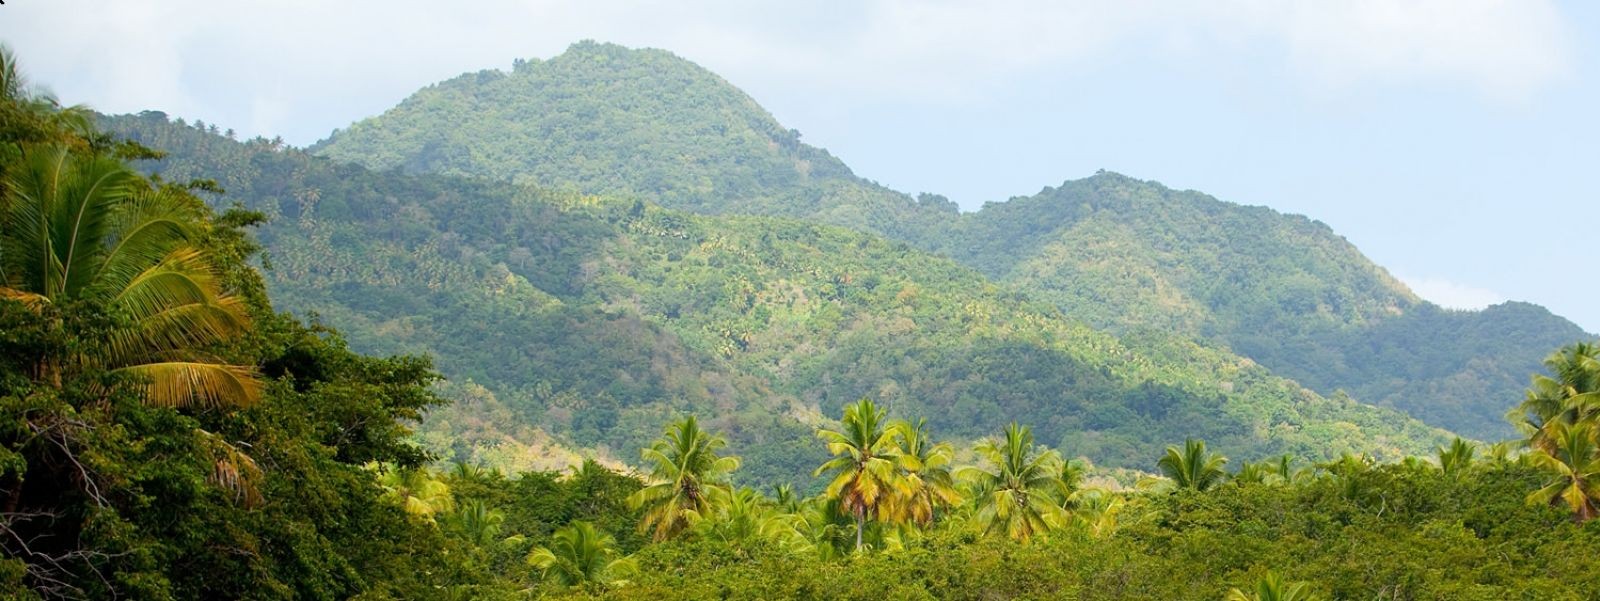 Dominica forest